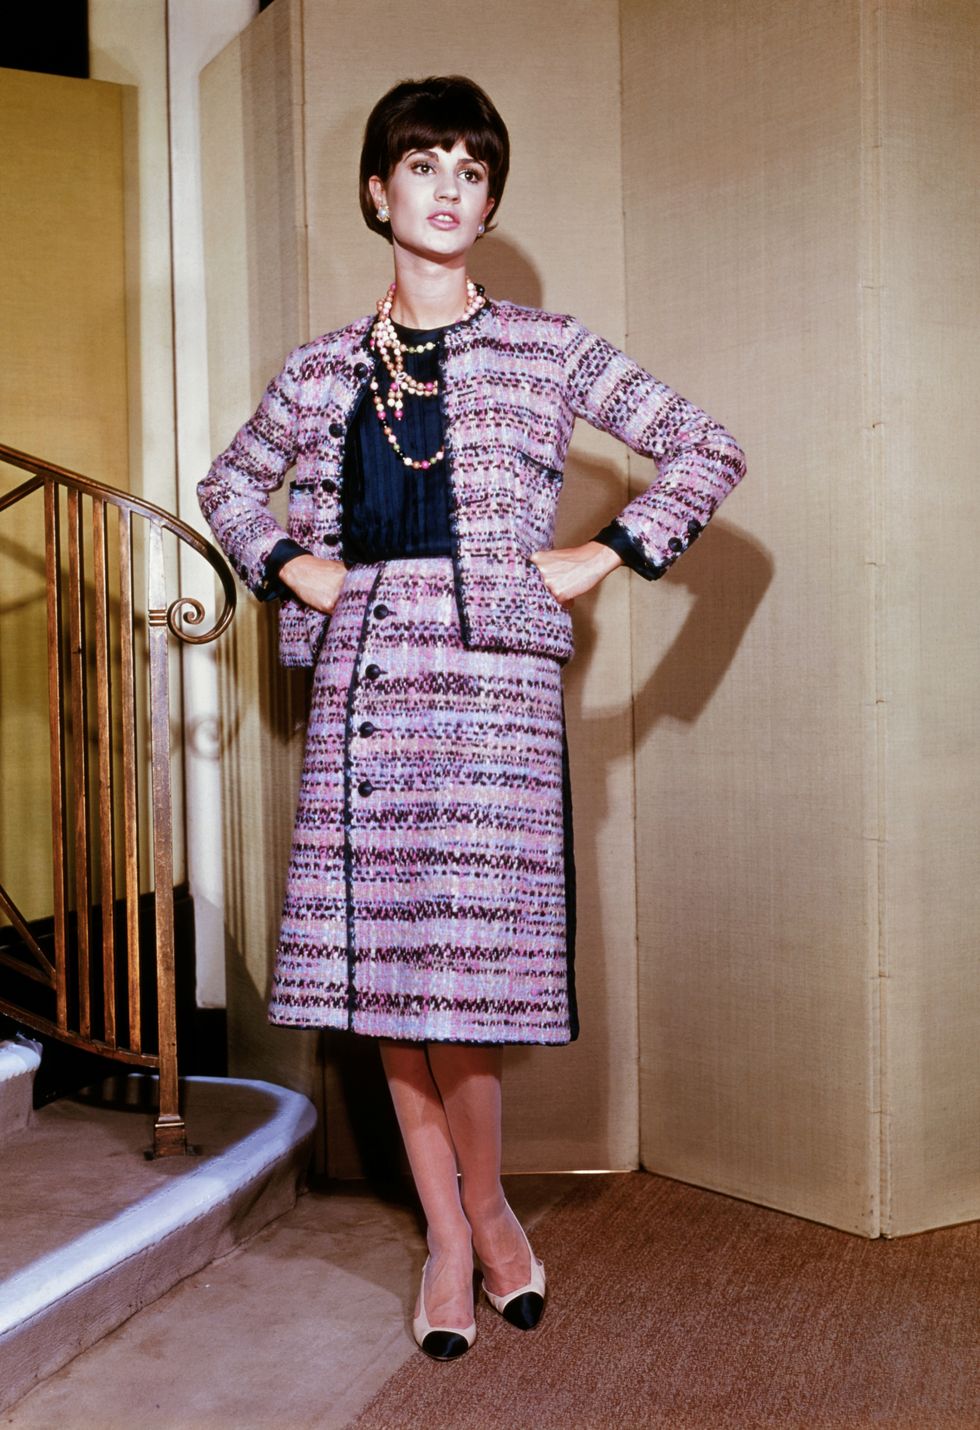 original caption paris wrap around chic following her typical silhouette, good chanel creates this suit for fall 1963 with a colorful flair the illustrious paris designer selects a colorful combination of pink, mauve, and navy blue tweed for the suit and binds the casually chic jacket in the contrasting navy the skirt is slender and wraps around the figure with a four buttoned closing at one side